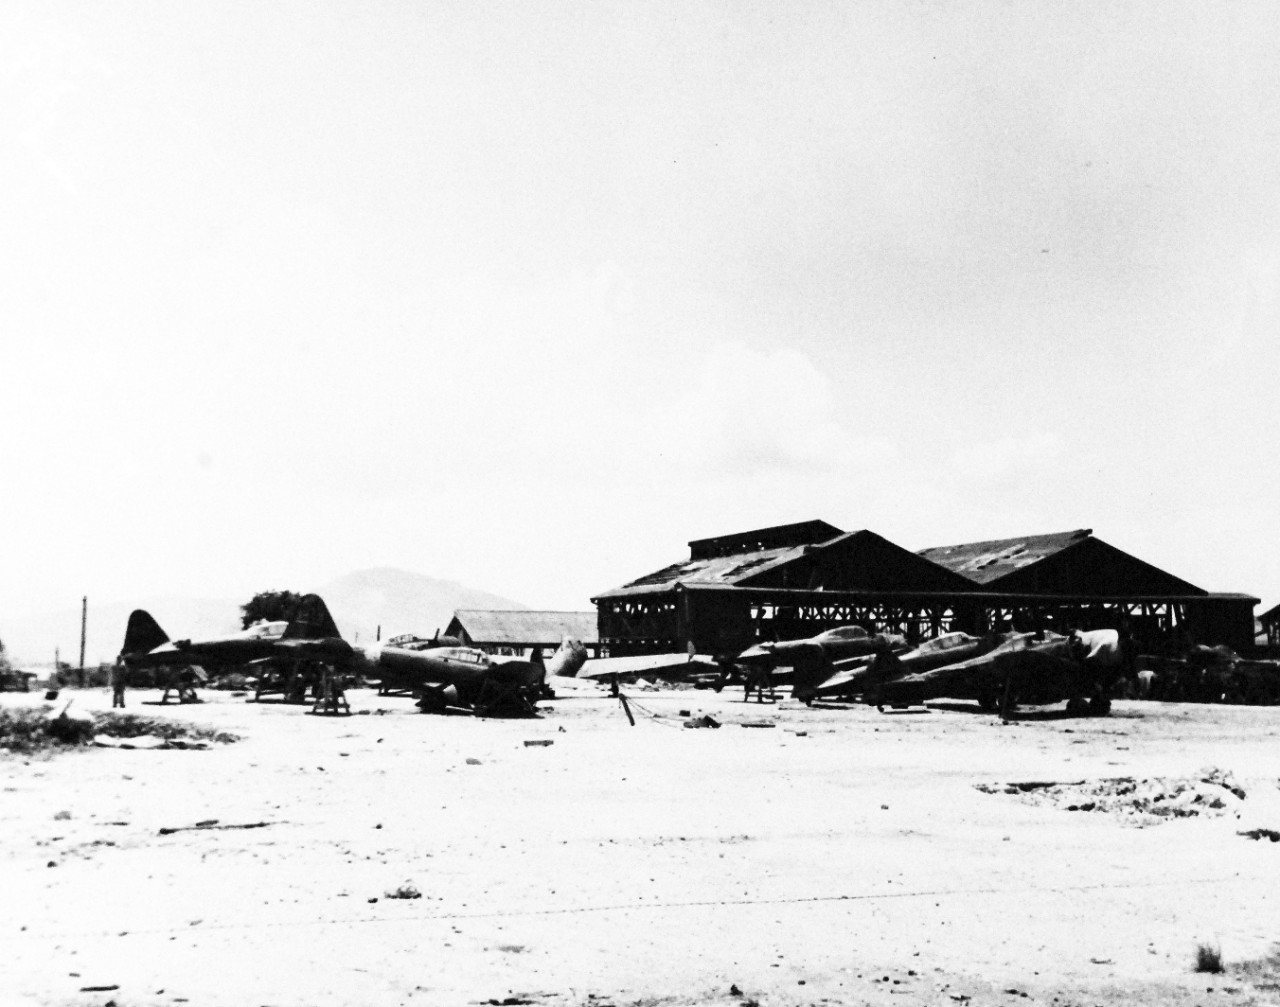 80-G-287136:   Invasion of Saipan, June-July 1944.     Japanese aircraft on Aslito airfield, Saipan, destroyed on the ground by U.S. Aerial bombing, Japanese Zero’s and hangars, July 8, 1944.   Official U.S. Navy photograph, now in the collections of the National Archives.  (2017/03/21).  